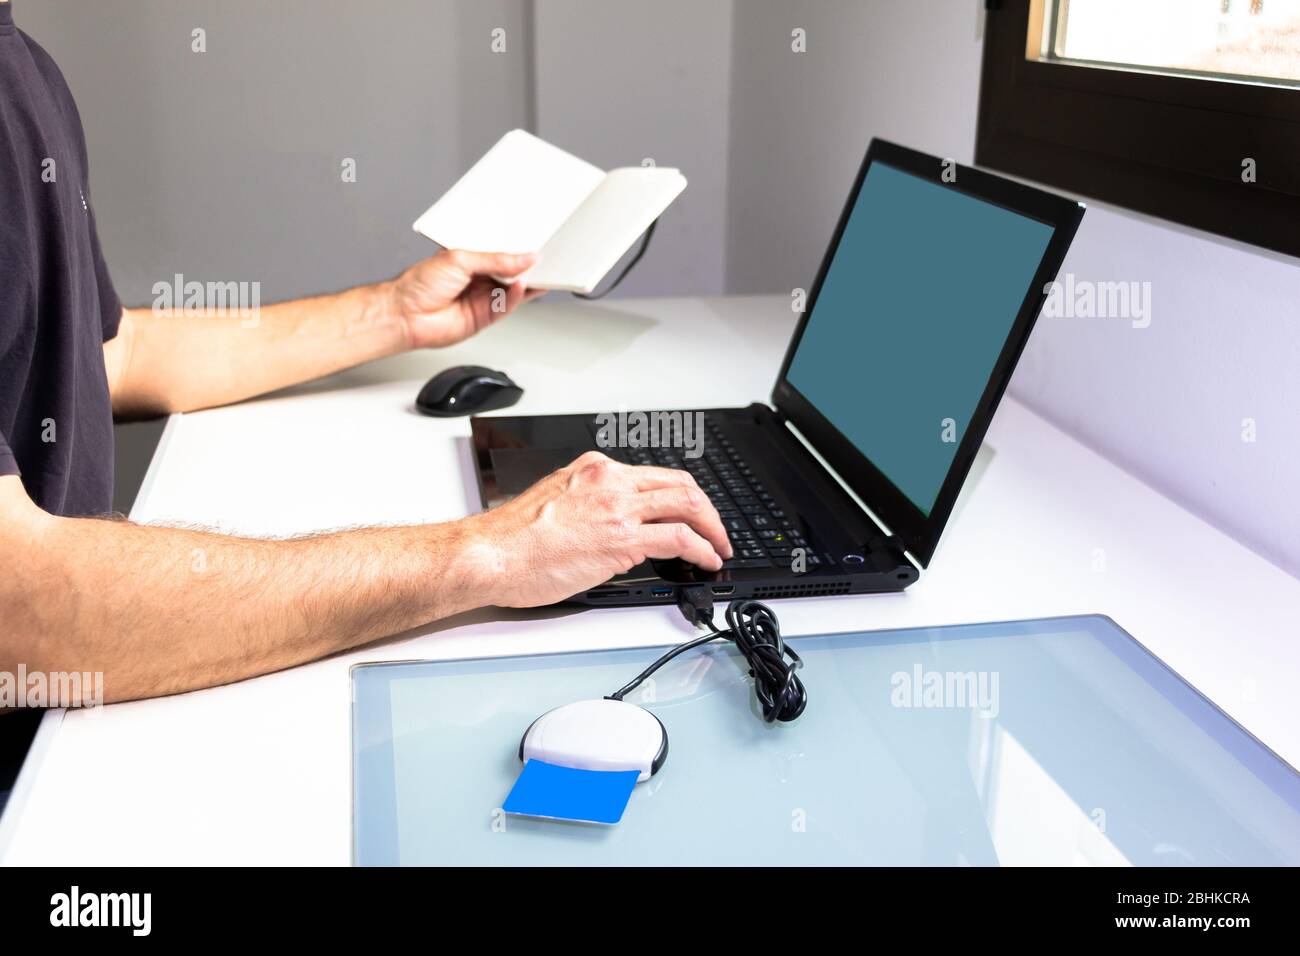 Close-up of the hands of a man working at home with his laptop, a notebook and identified by a card reader. Covid-19 confinement concept Stock Photo